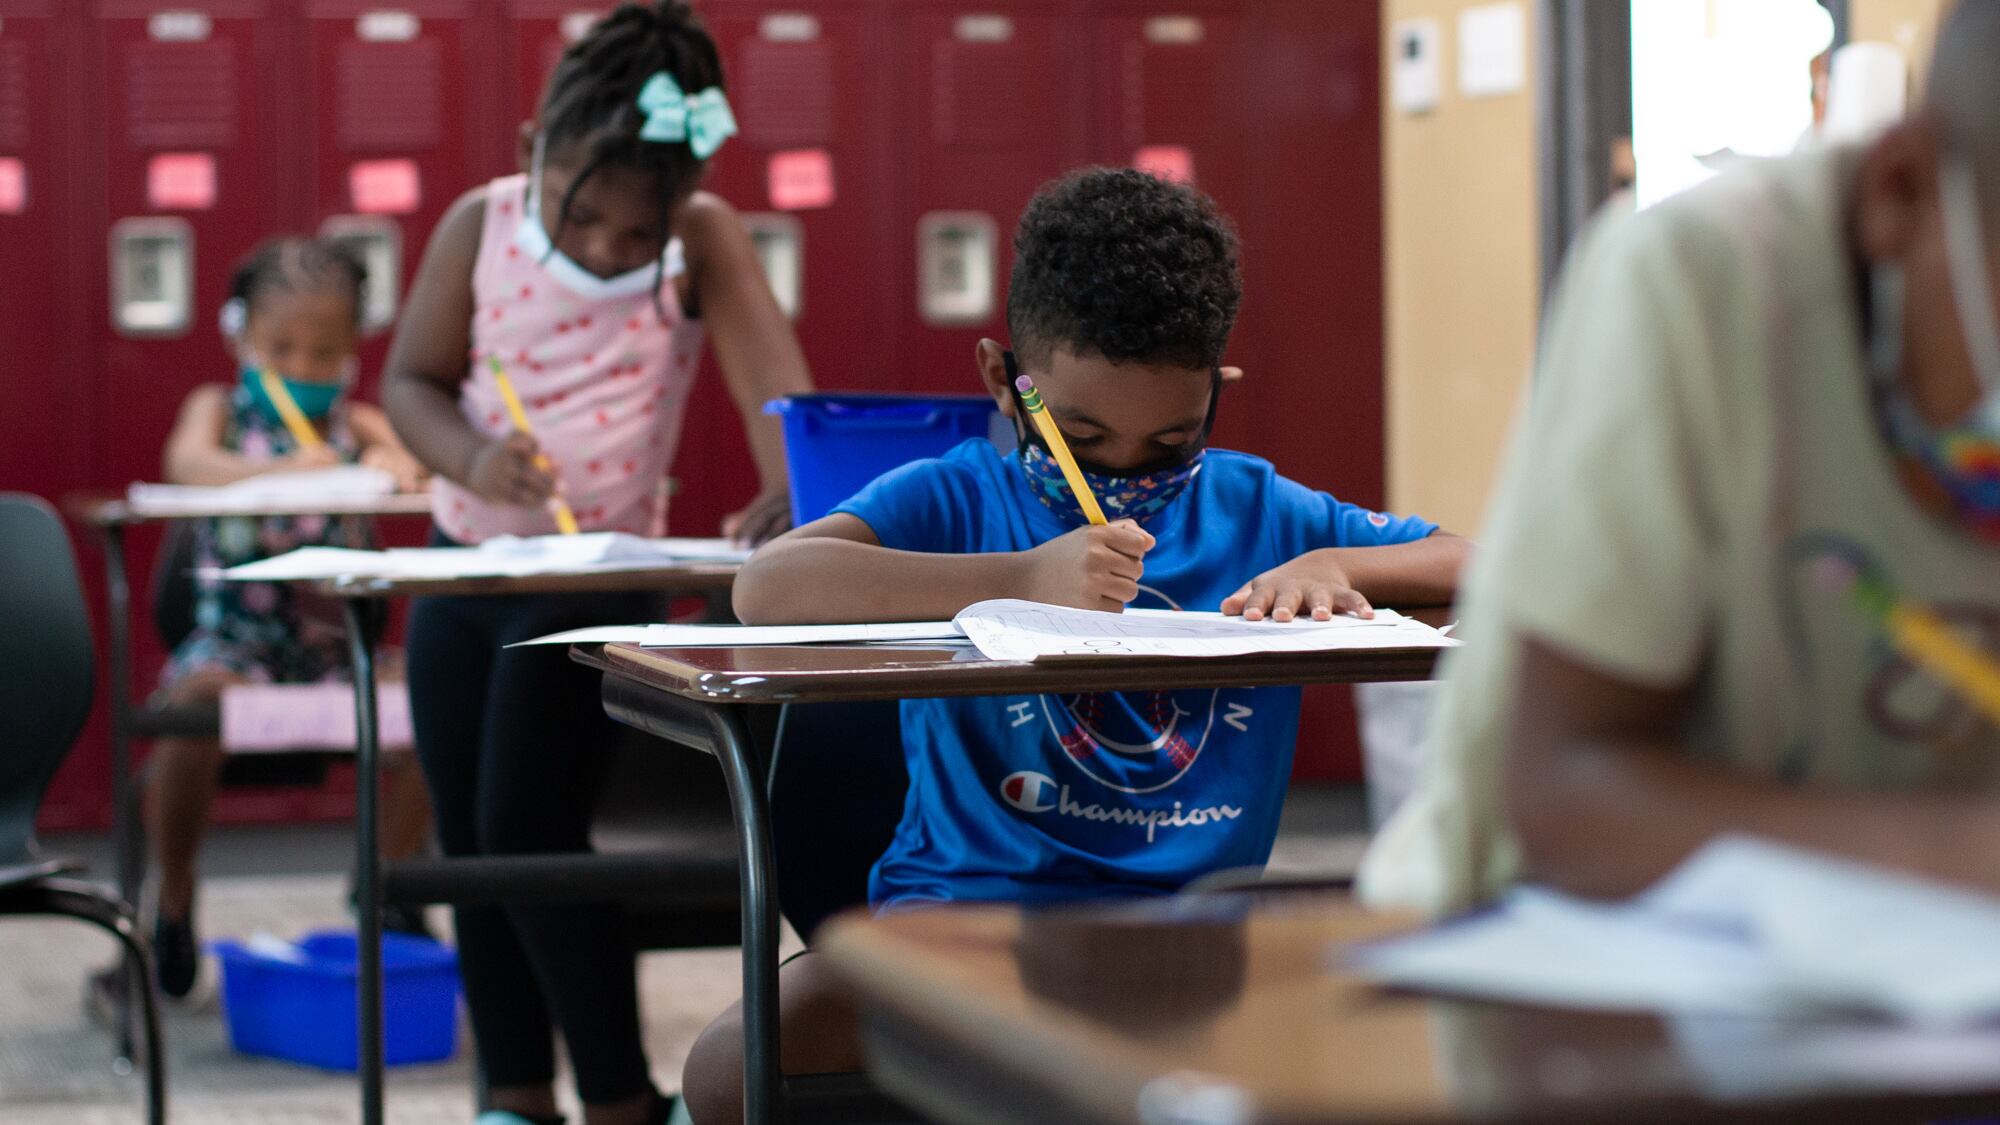 Four students sit in a row of desks in a classroom lined with red lockers. One boy wears a blue shirt and blue mask while writing on a worksheet